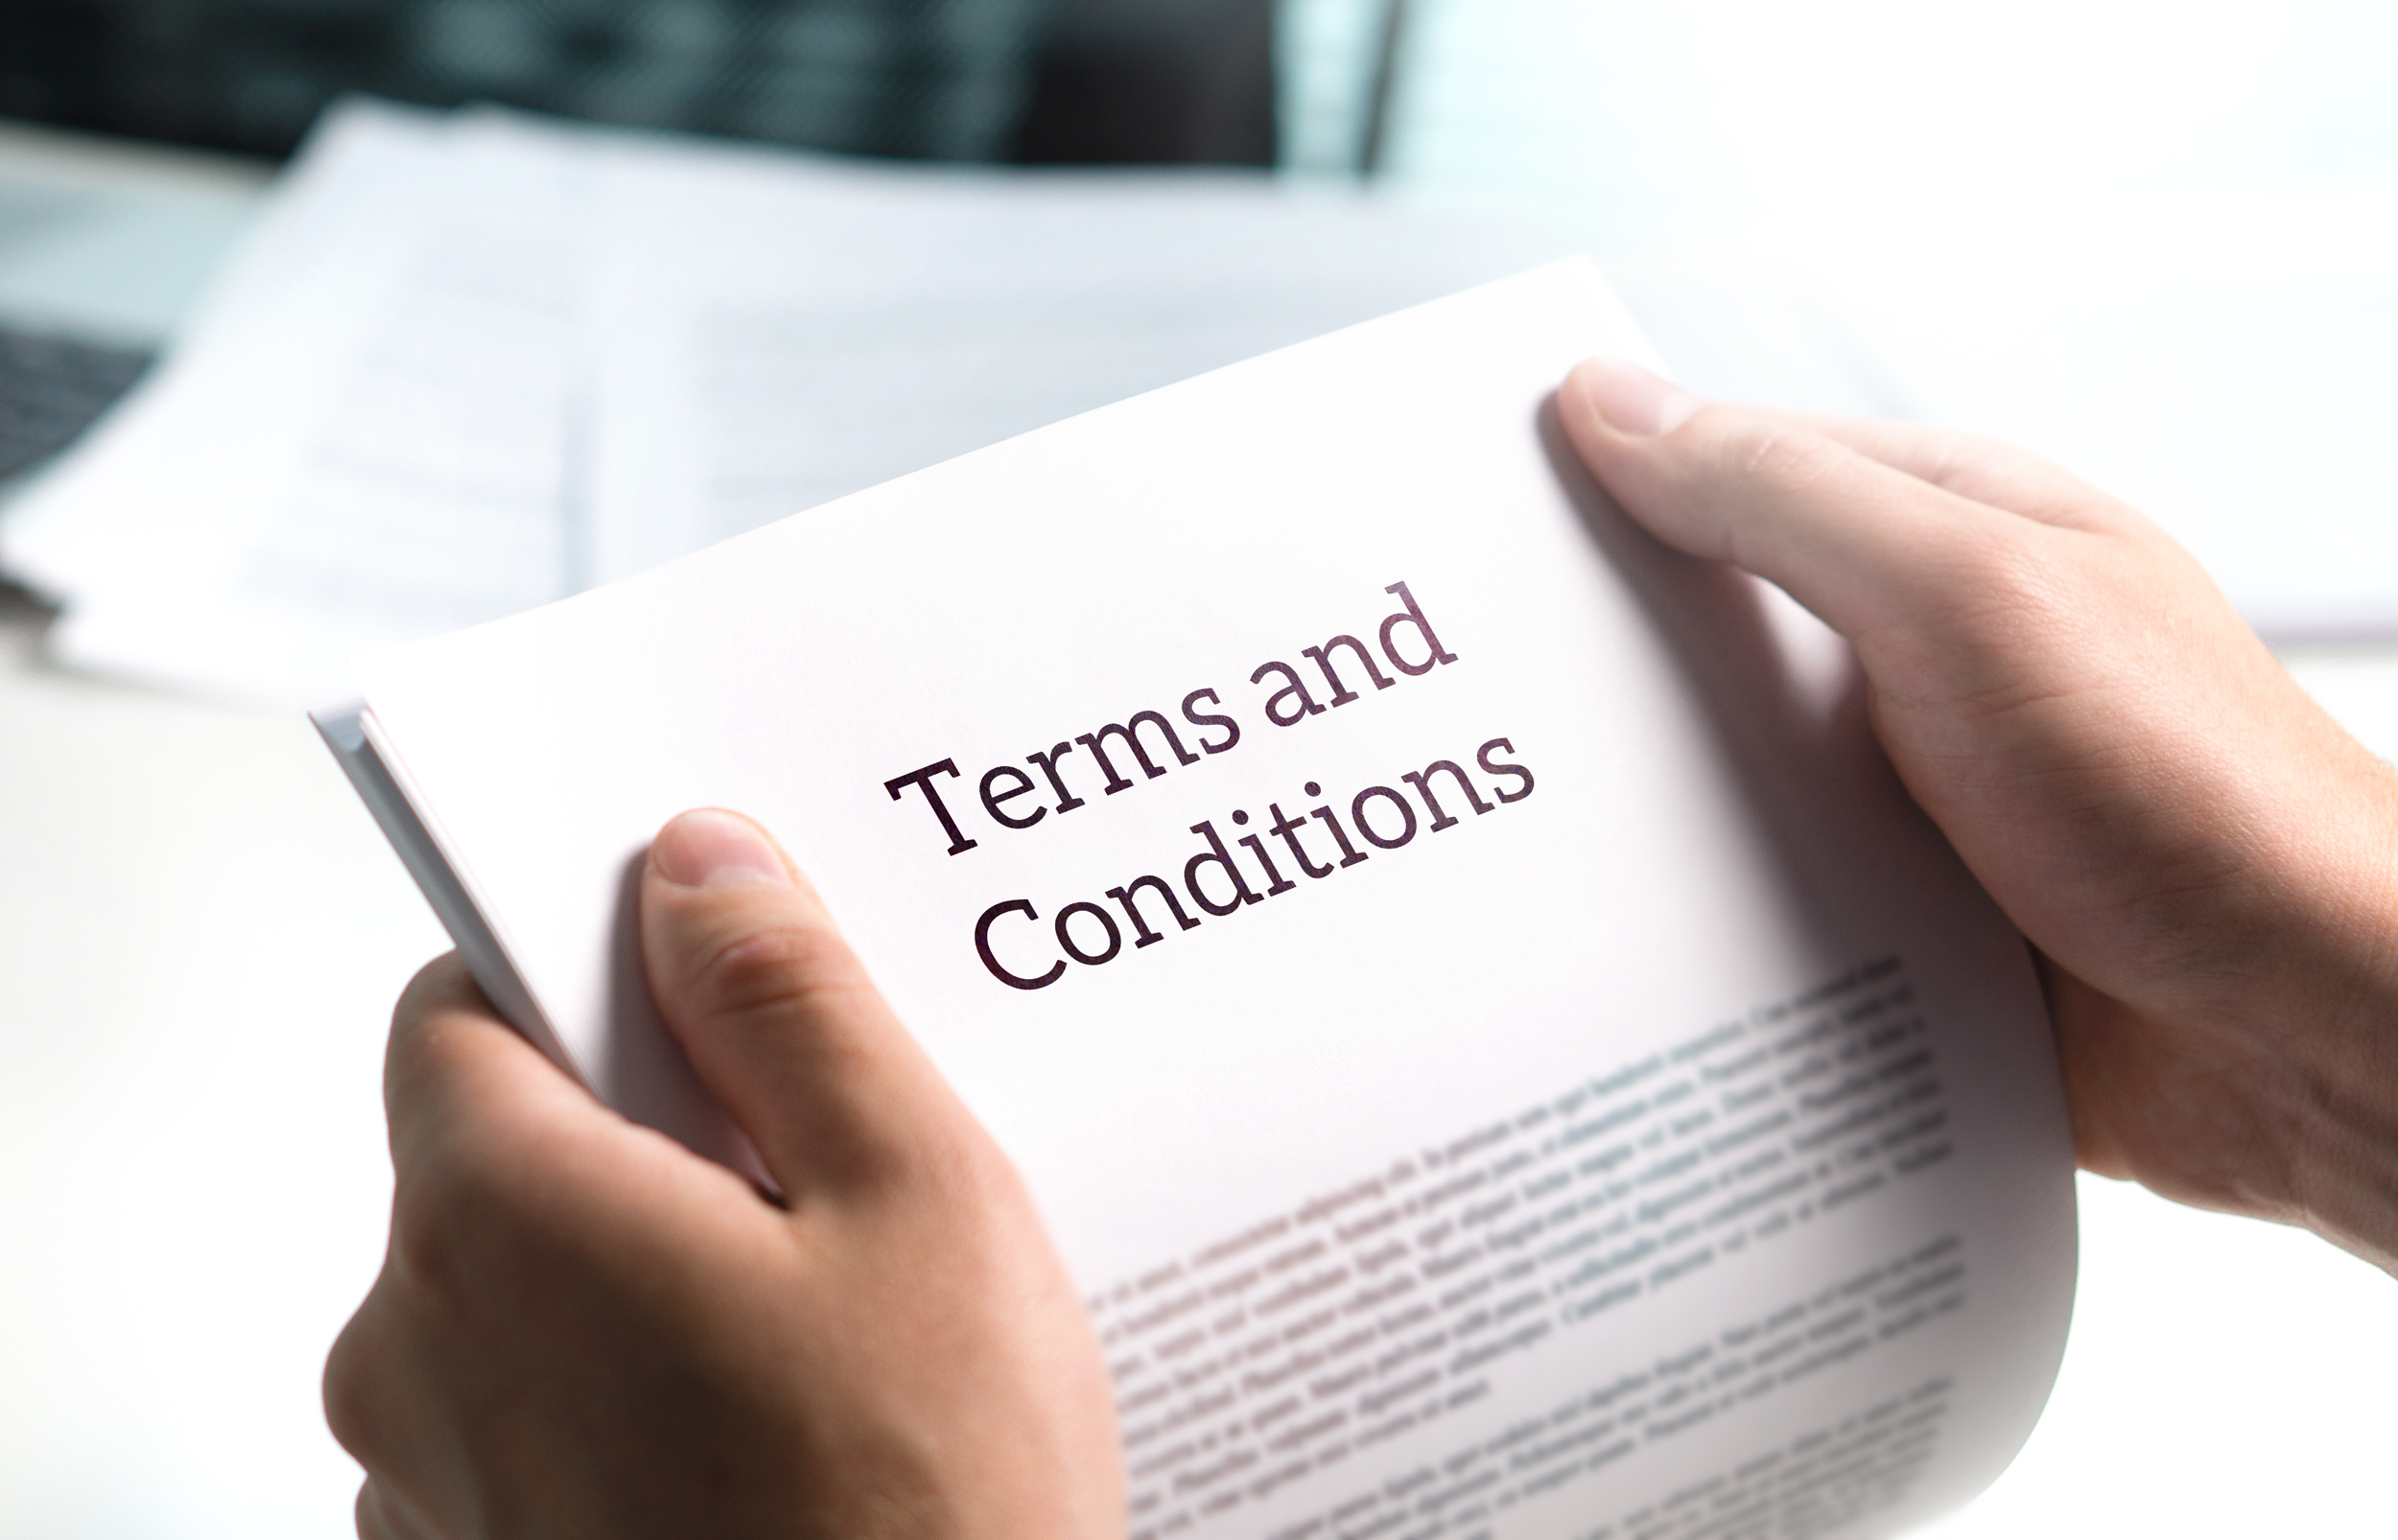 terms-and-conditions-text-in-legal-agreement-or-document-about-service-insurance-or-loan-policy